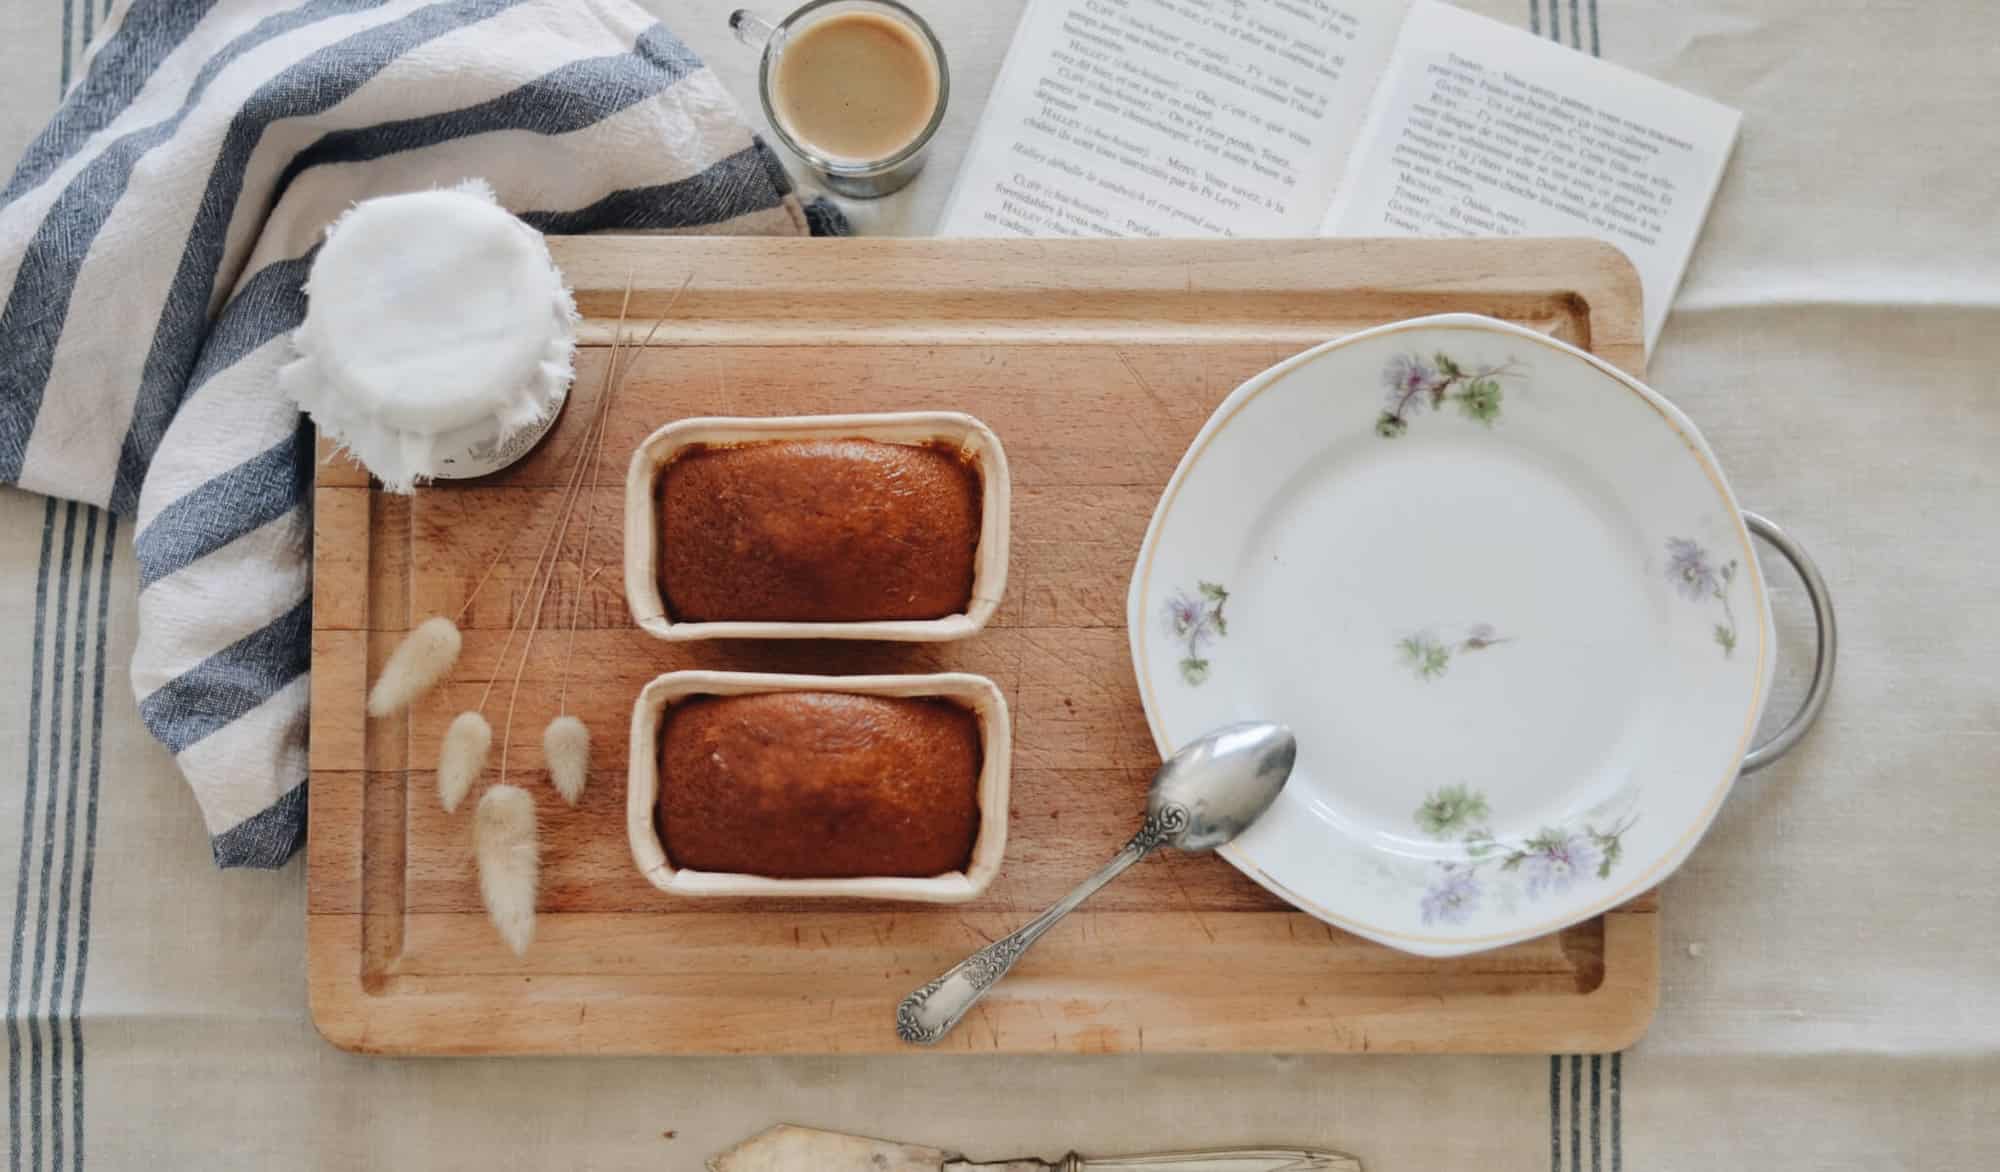 Left: a breakfast set with a white plate, wooden board, 2 brown cupcakes, and a cup of coffee.